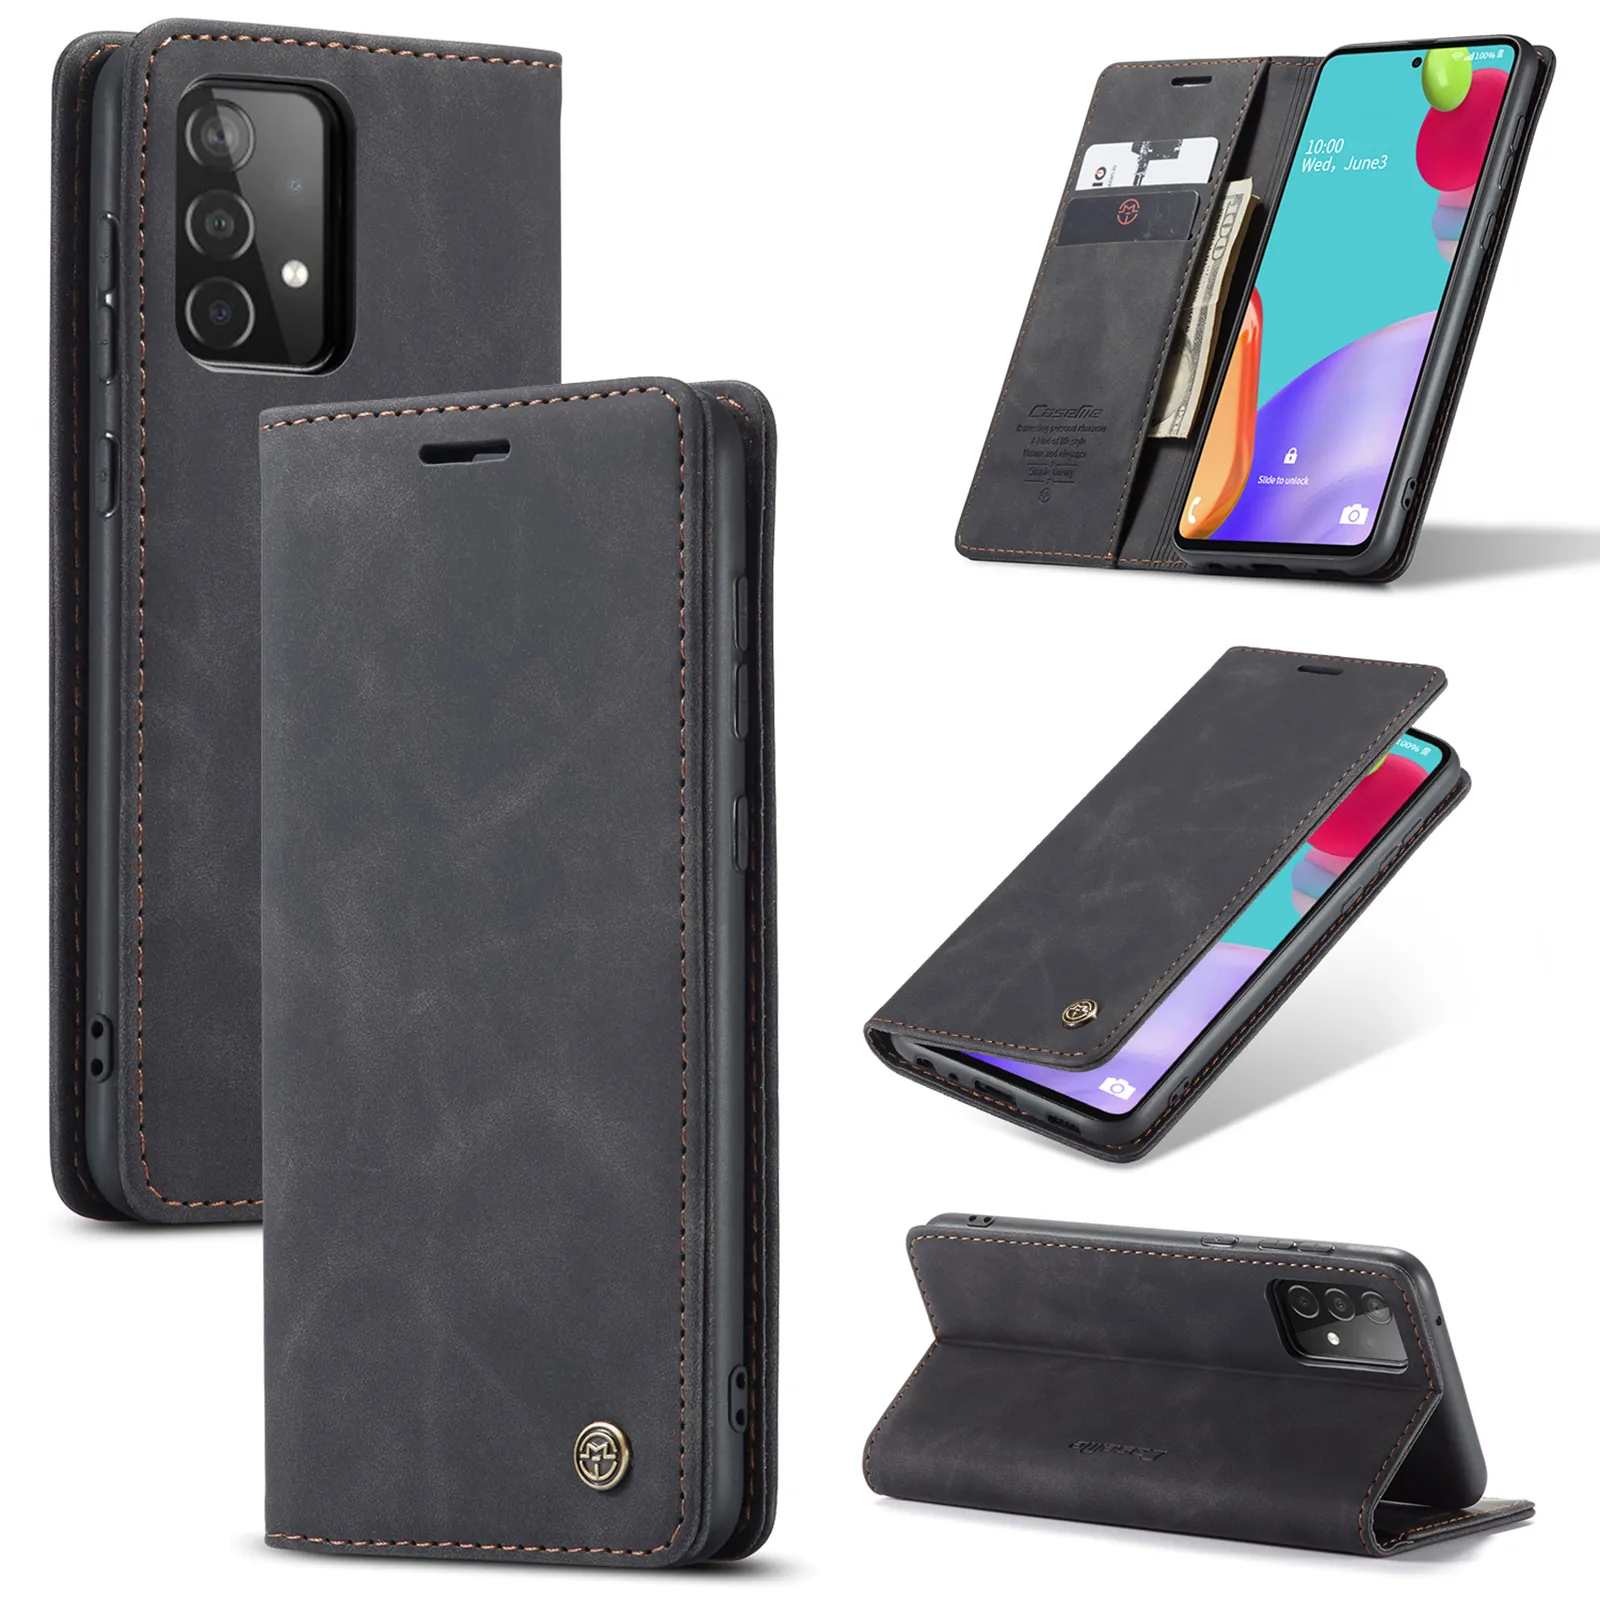 Slim Retro Vintage Leather Stand Flip Wallet Fodral för Samsung Galaxy A52 5G A72 A42 A32 S21 Ultra S20 Plus S10 Note 20